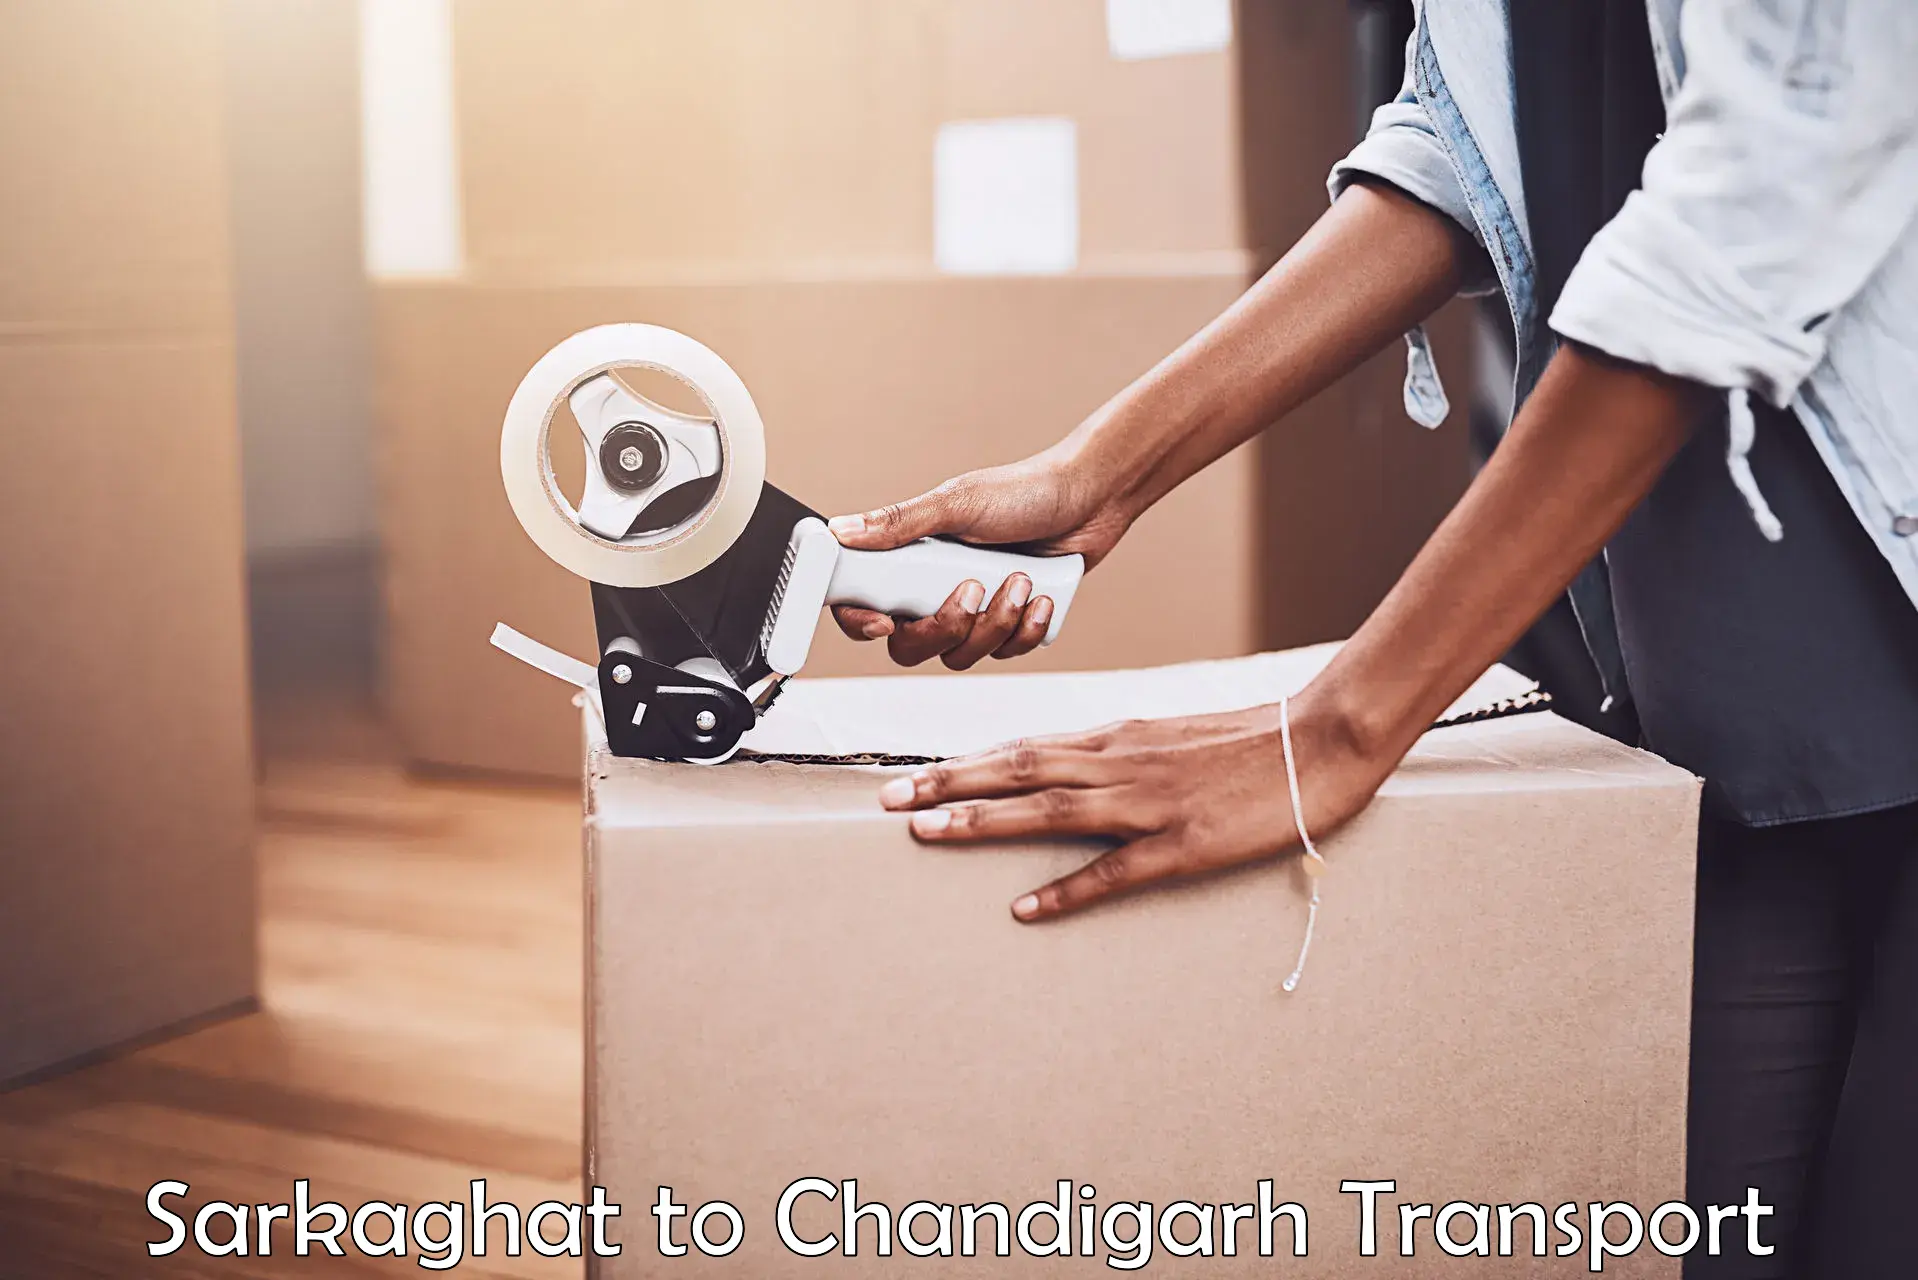 Daily parcel service transport Sarkaghat to Chandigarh